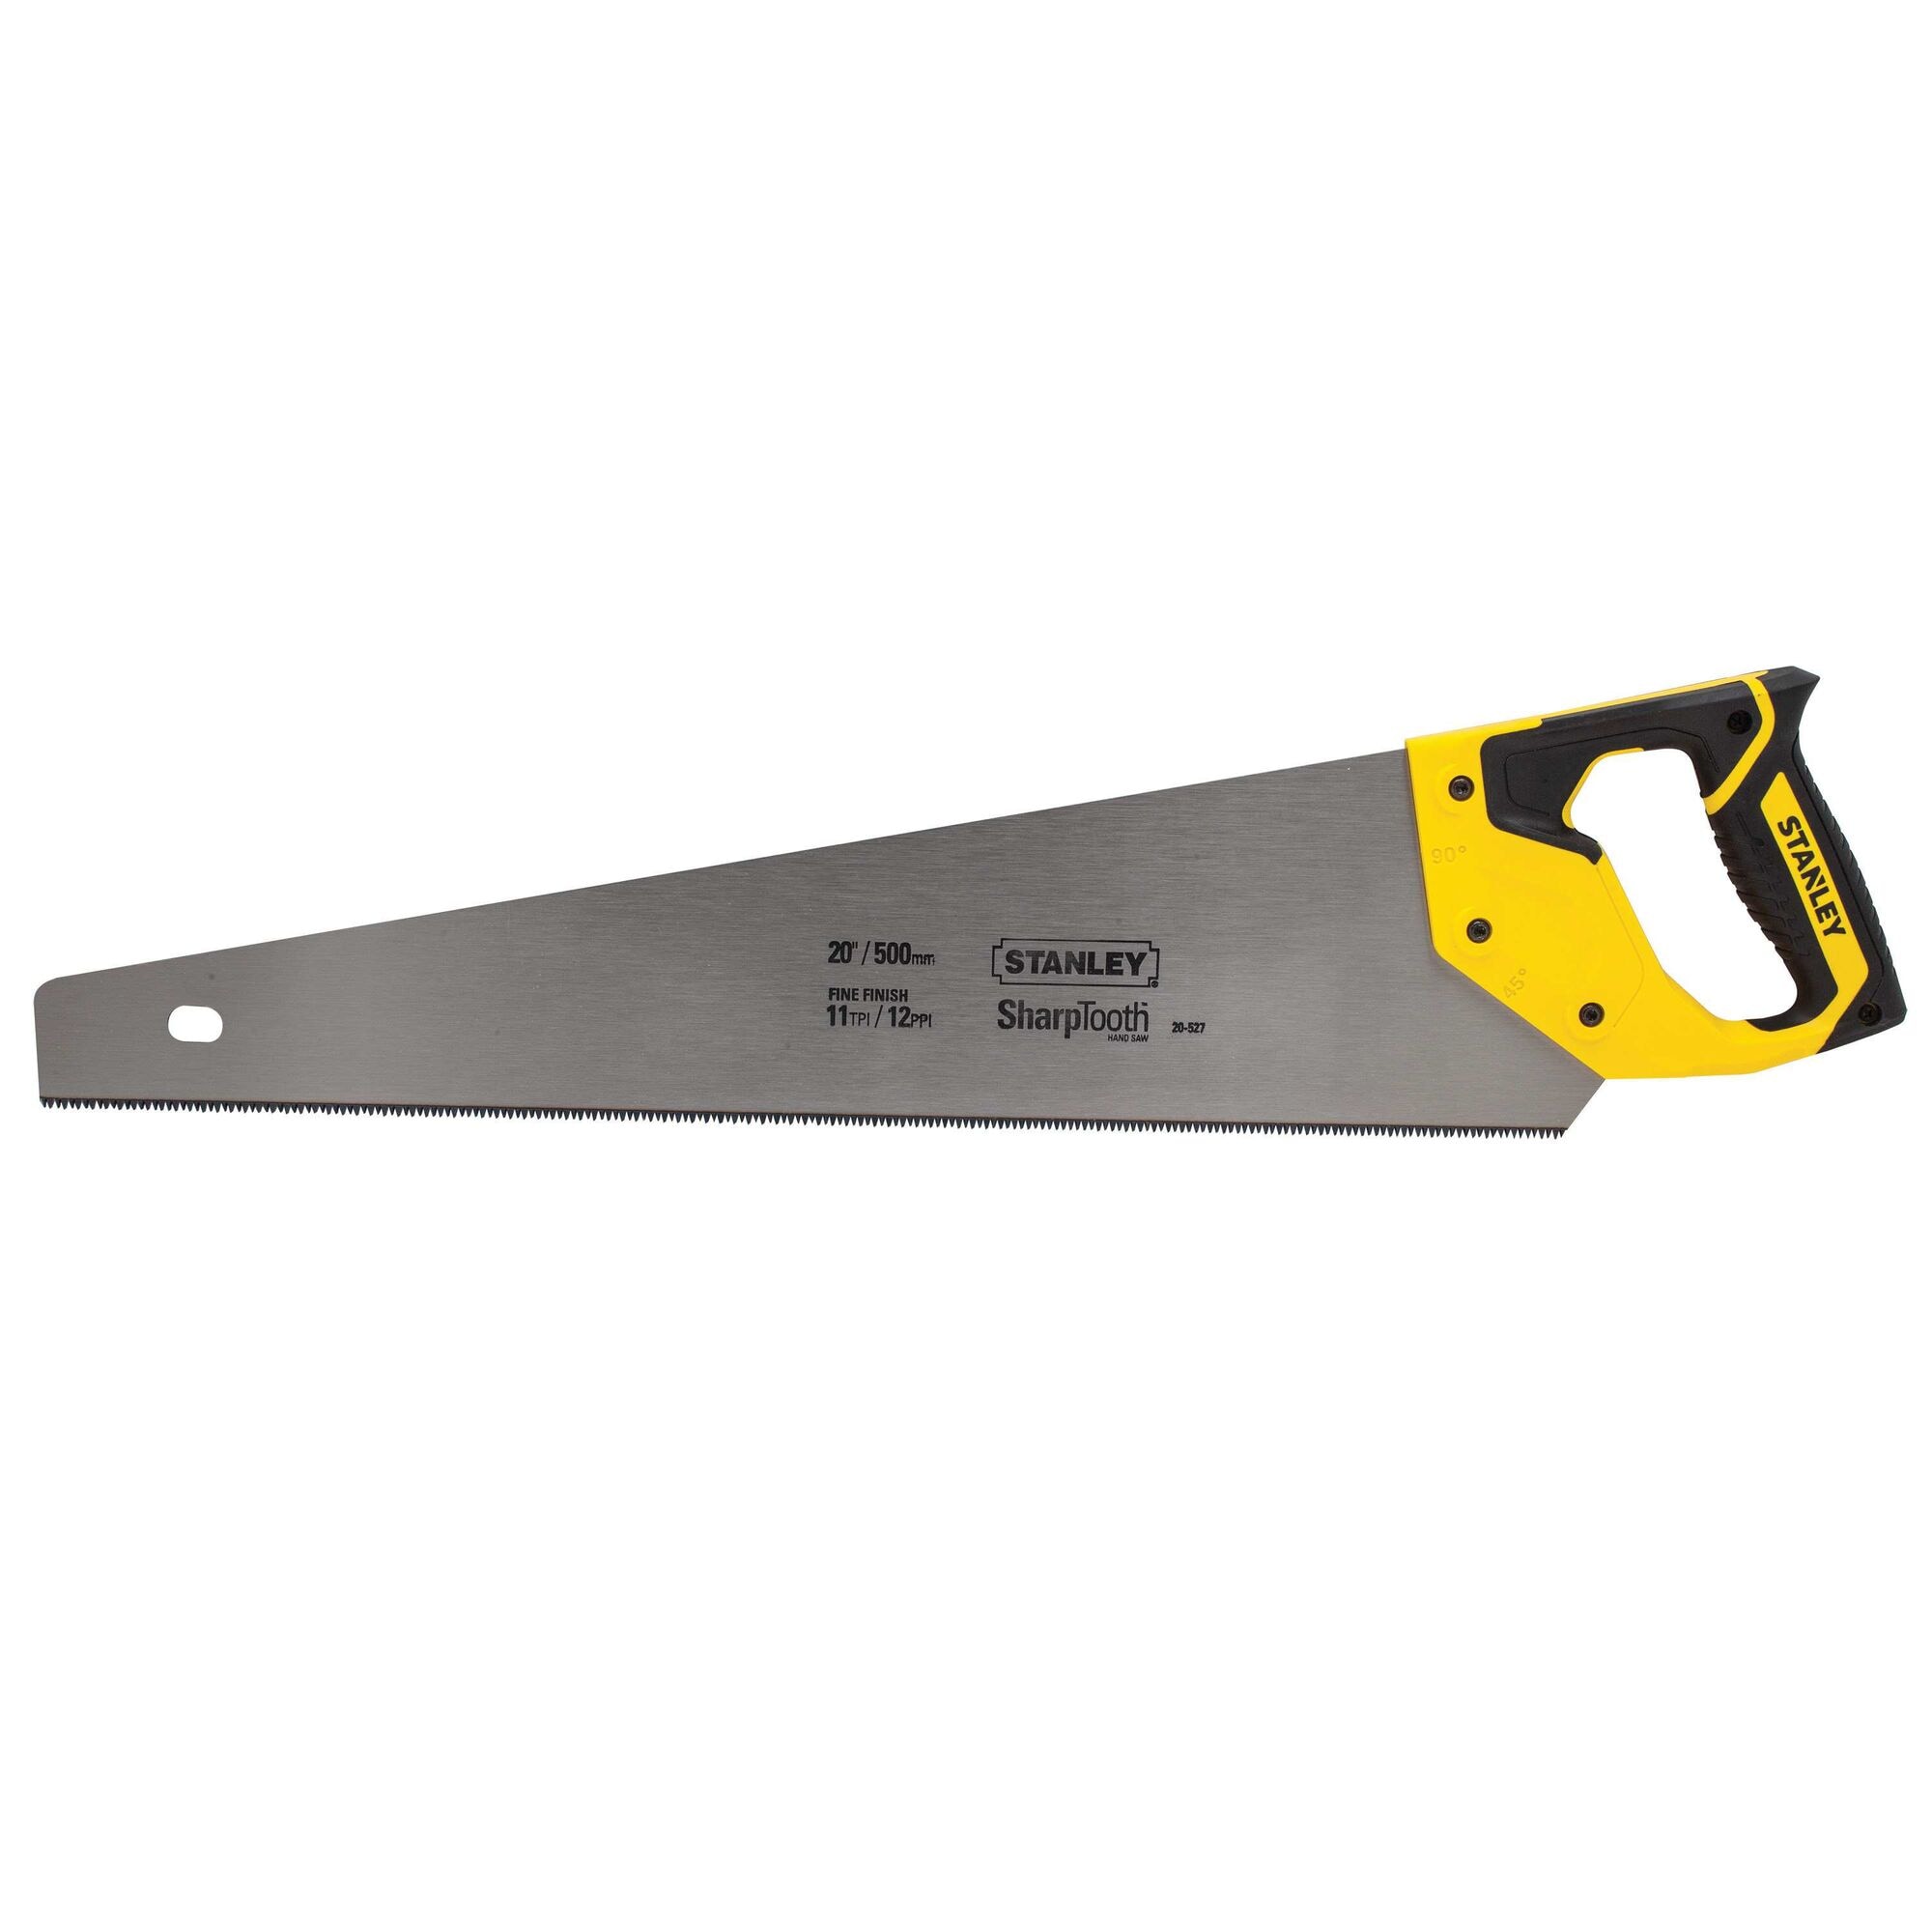 26 in environ 66.04 cm 1.4 TPI Stanley OUTILS STA115441 FatMax ® béton cellulaire Saw 660 mm 